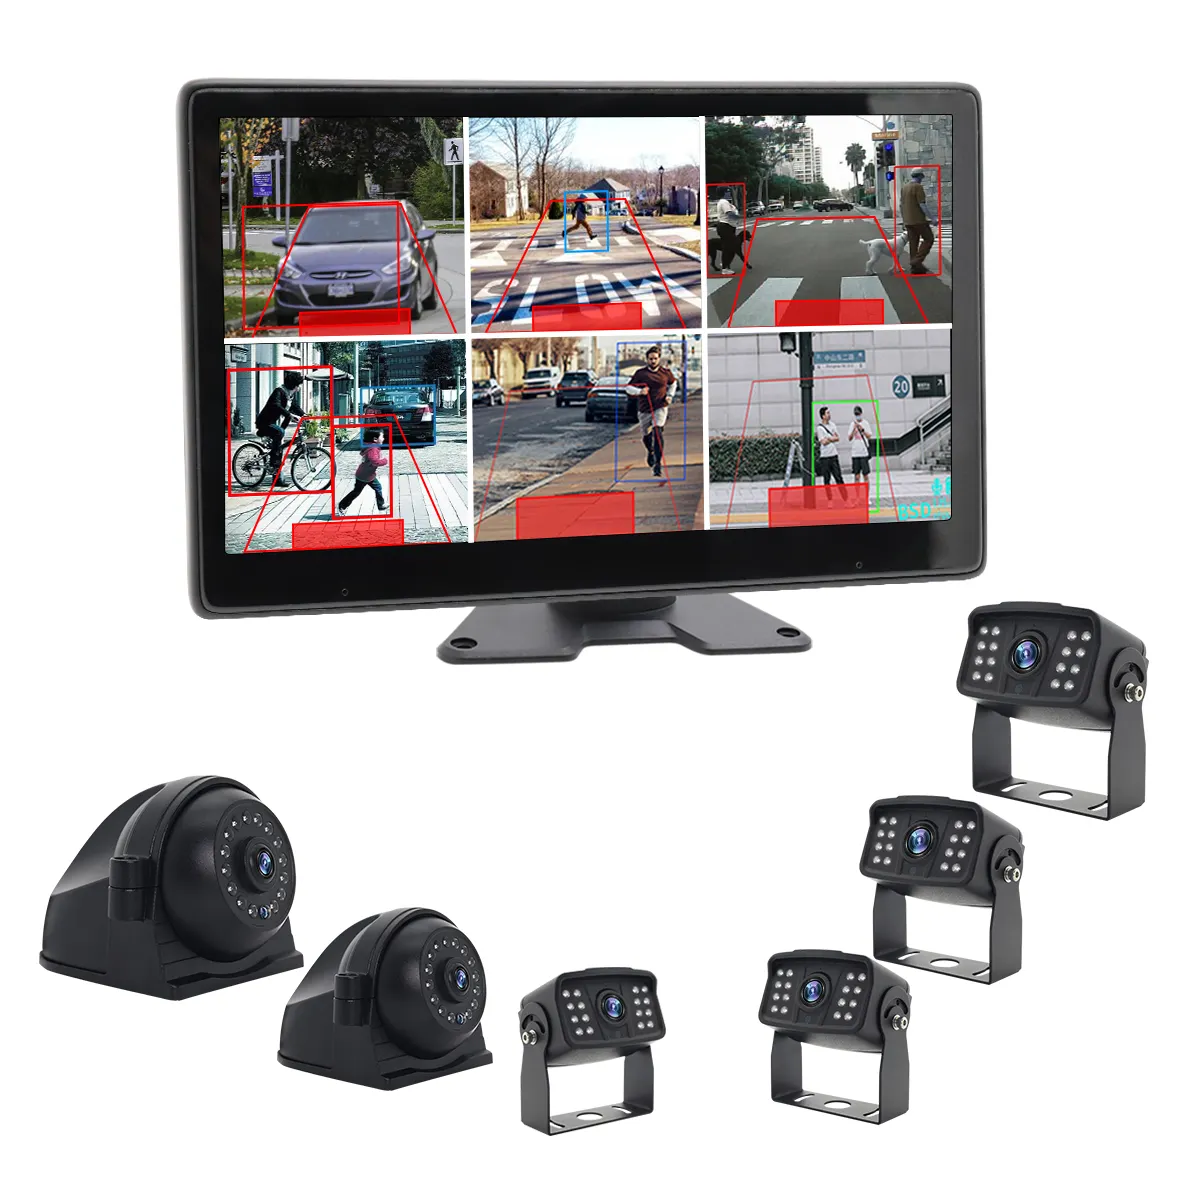 Wholesale Support Ahd 9-36v Vehicle Truck Backup Camera 10.1 Inch 1024*600 Hd Monitor 6ch Dvr Rear View Car Monitor System Kits